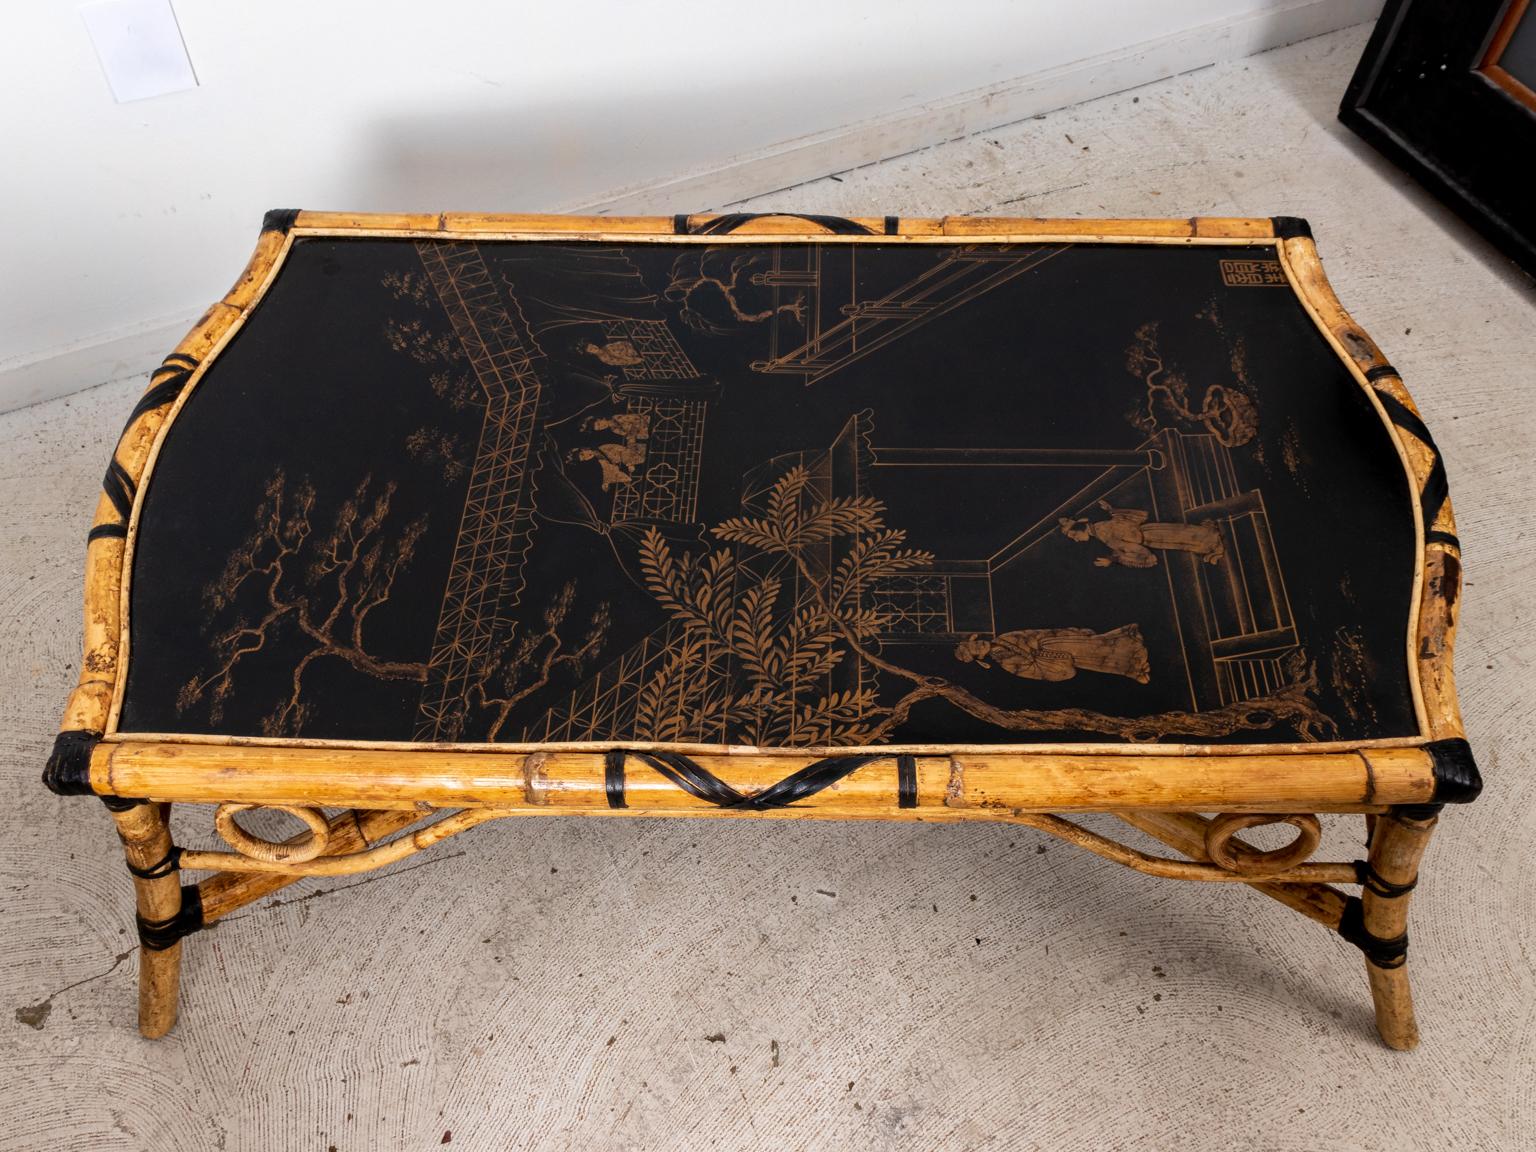 Bamboo frame coffee table with black and gold painted Chinoiserie decoration on the tabletop. The panel on the tabletop depicts Chinoiserie style figures in a village scene with trees. The table itself is accented with circular medallions on the